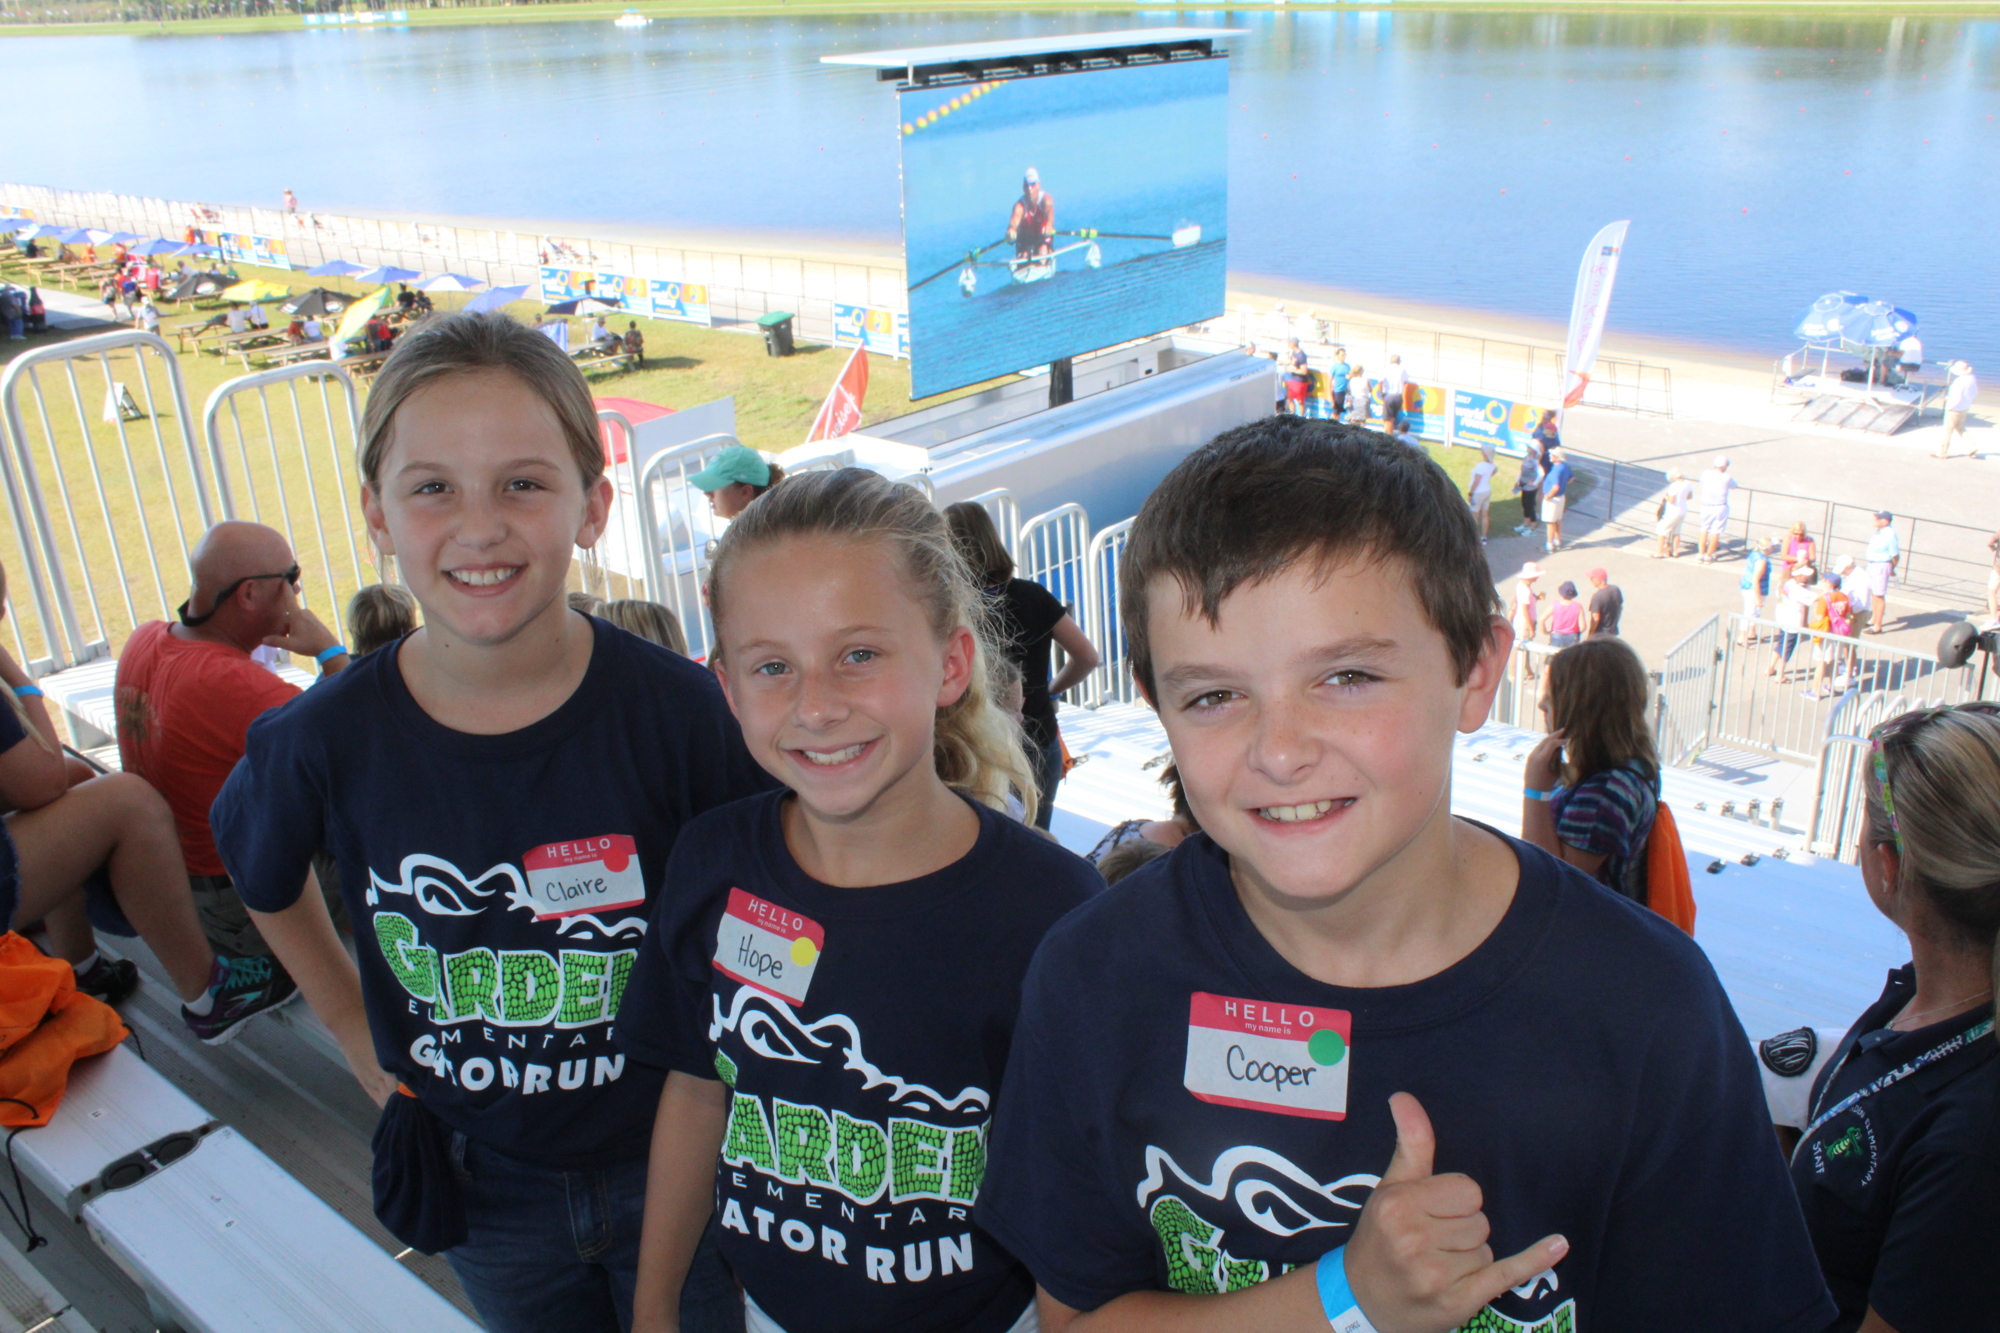 Garden Elementary School fifth-graders Claire Timmerman, Hope Hirtzel and Cooper McGowan drew the U.S. art portrait that sits on display at the World Rowing Championship venue.